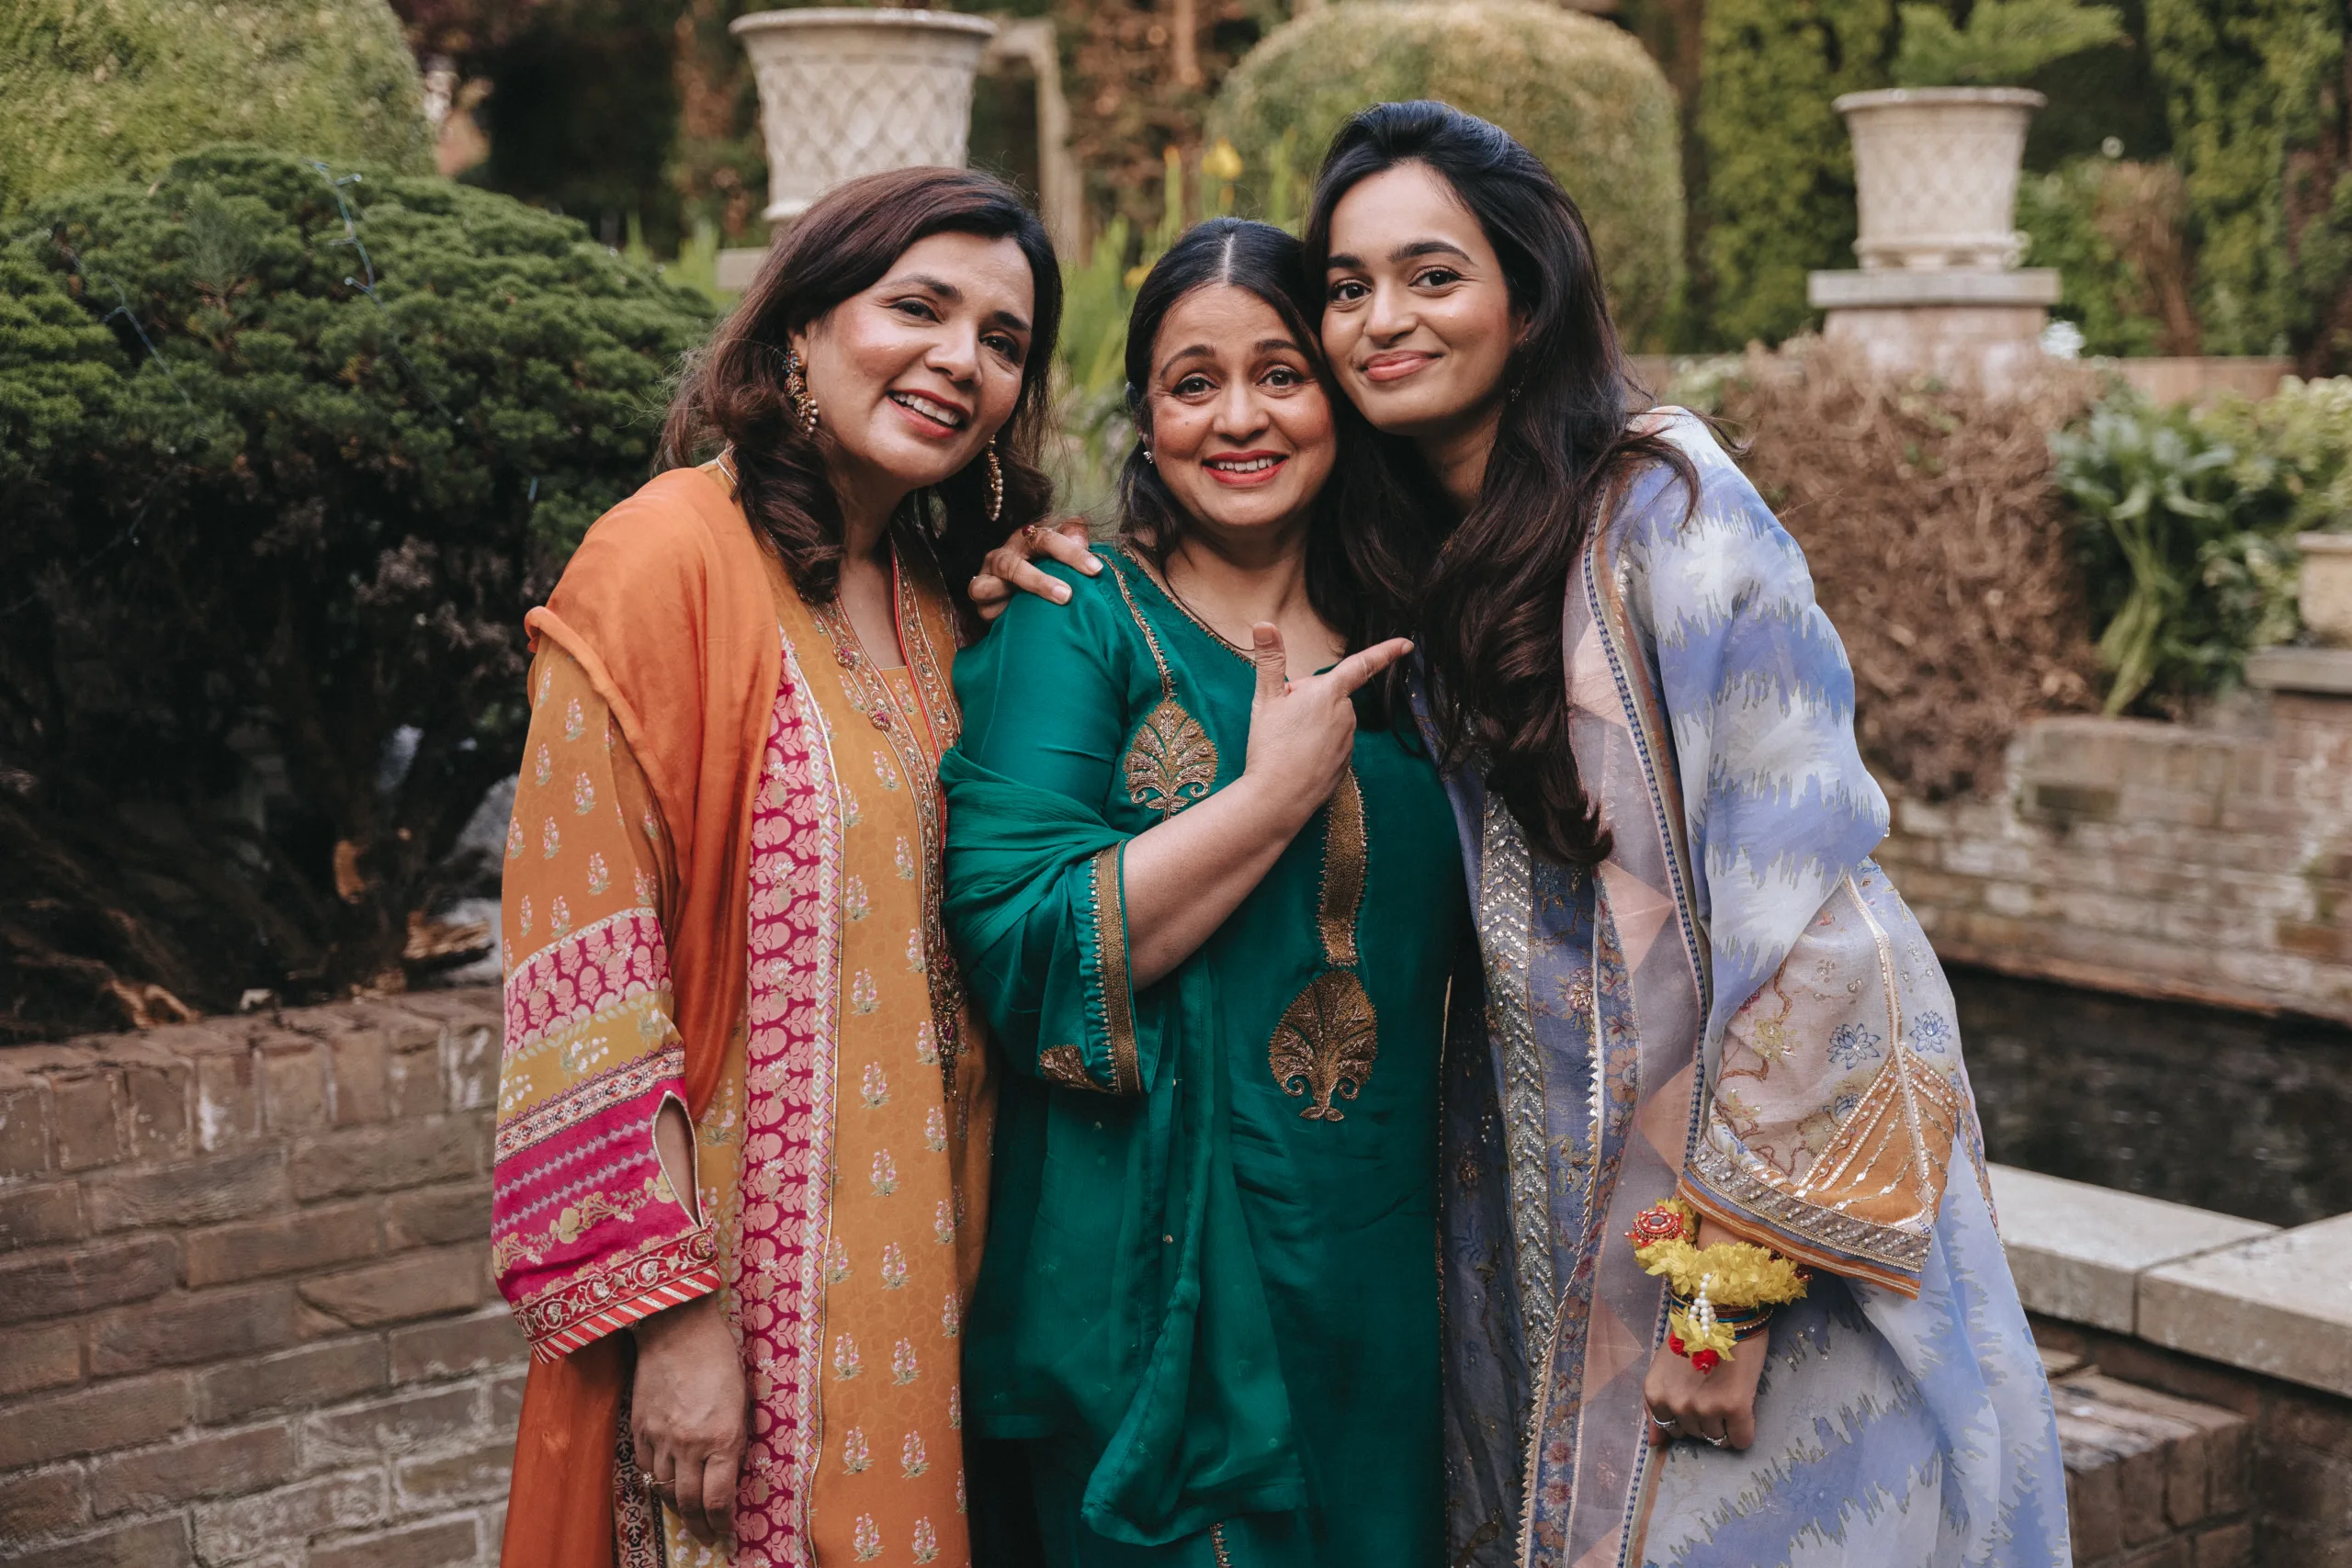 Three Indian women posing for a photo in a garden, captured by a photographer in Lincolnshire.